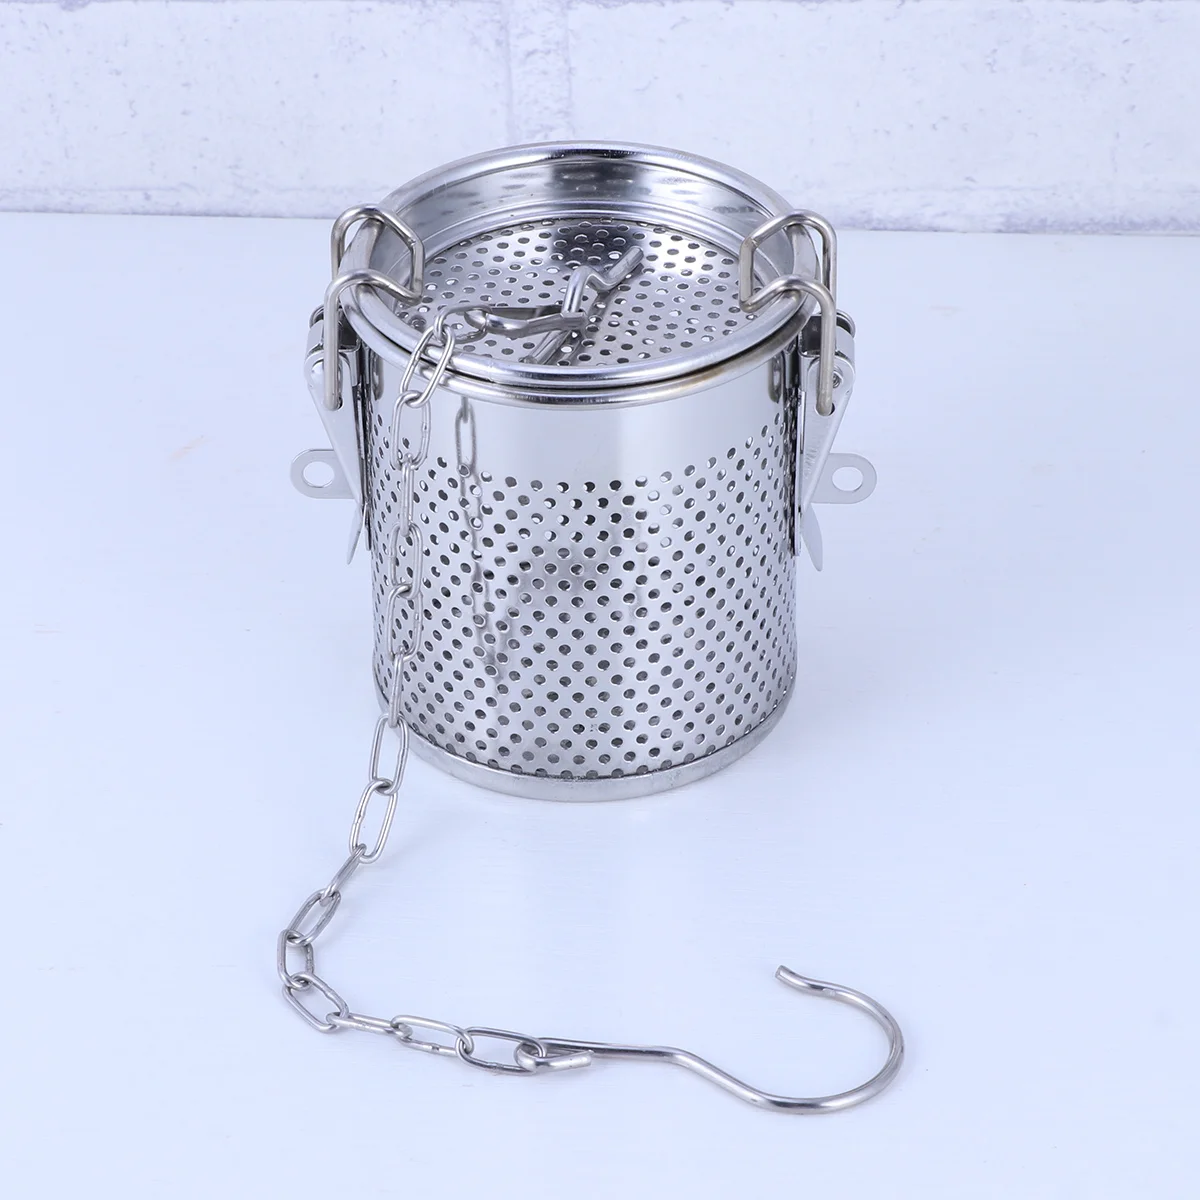 

Stainless Steel Tiny Holes Spice Infuser Soup Straining Basket Seasoning Ball Filtering Tool Kitchen Gadget (Medium Size)